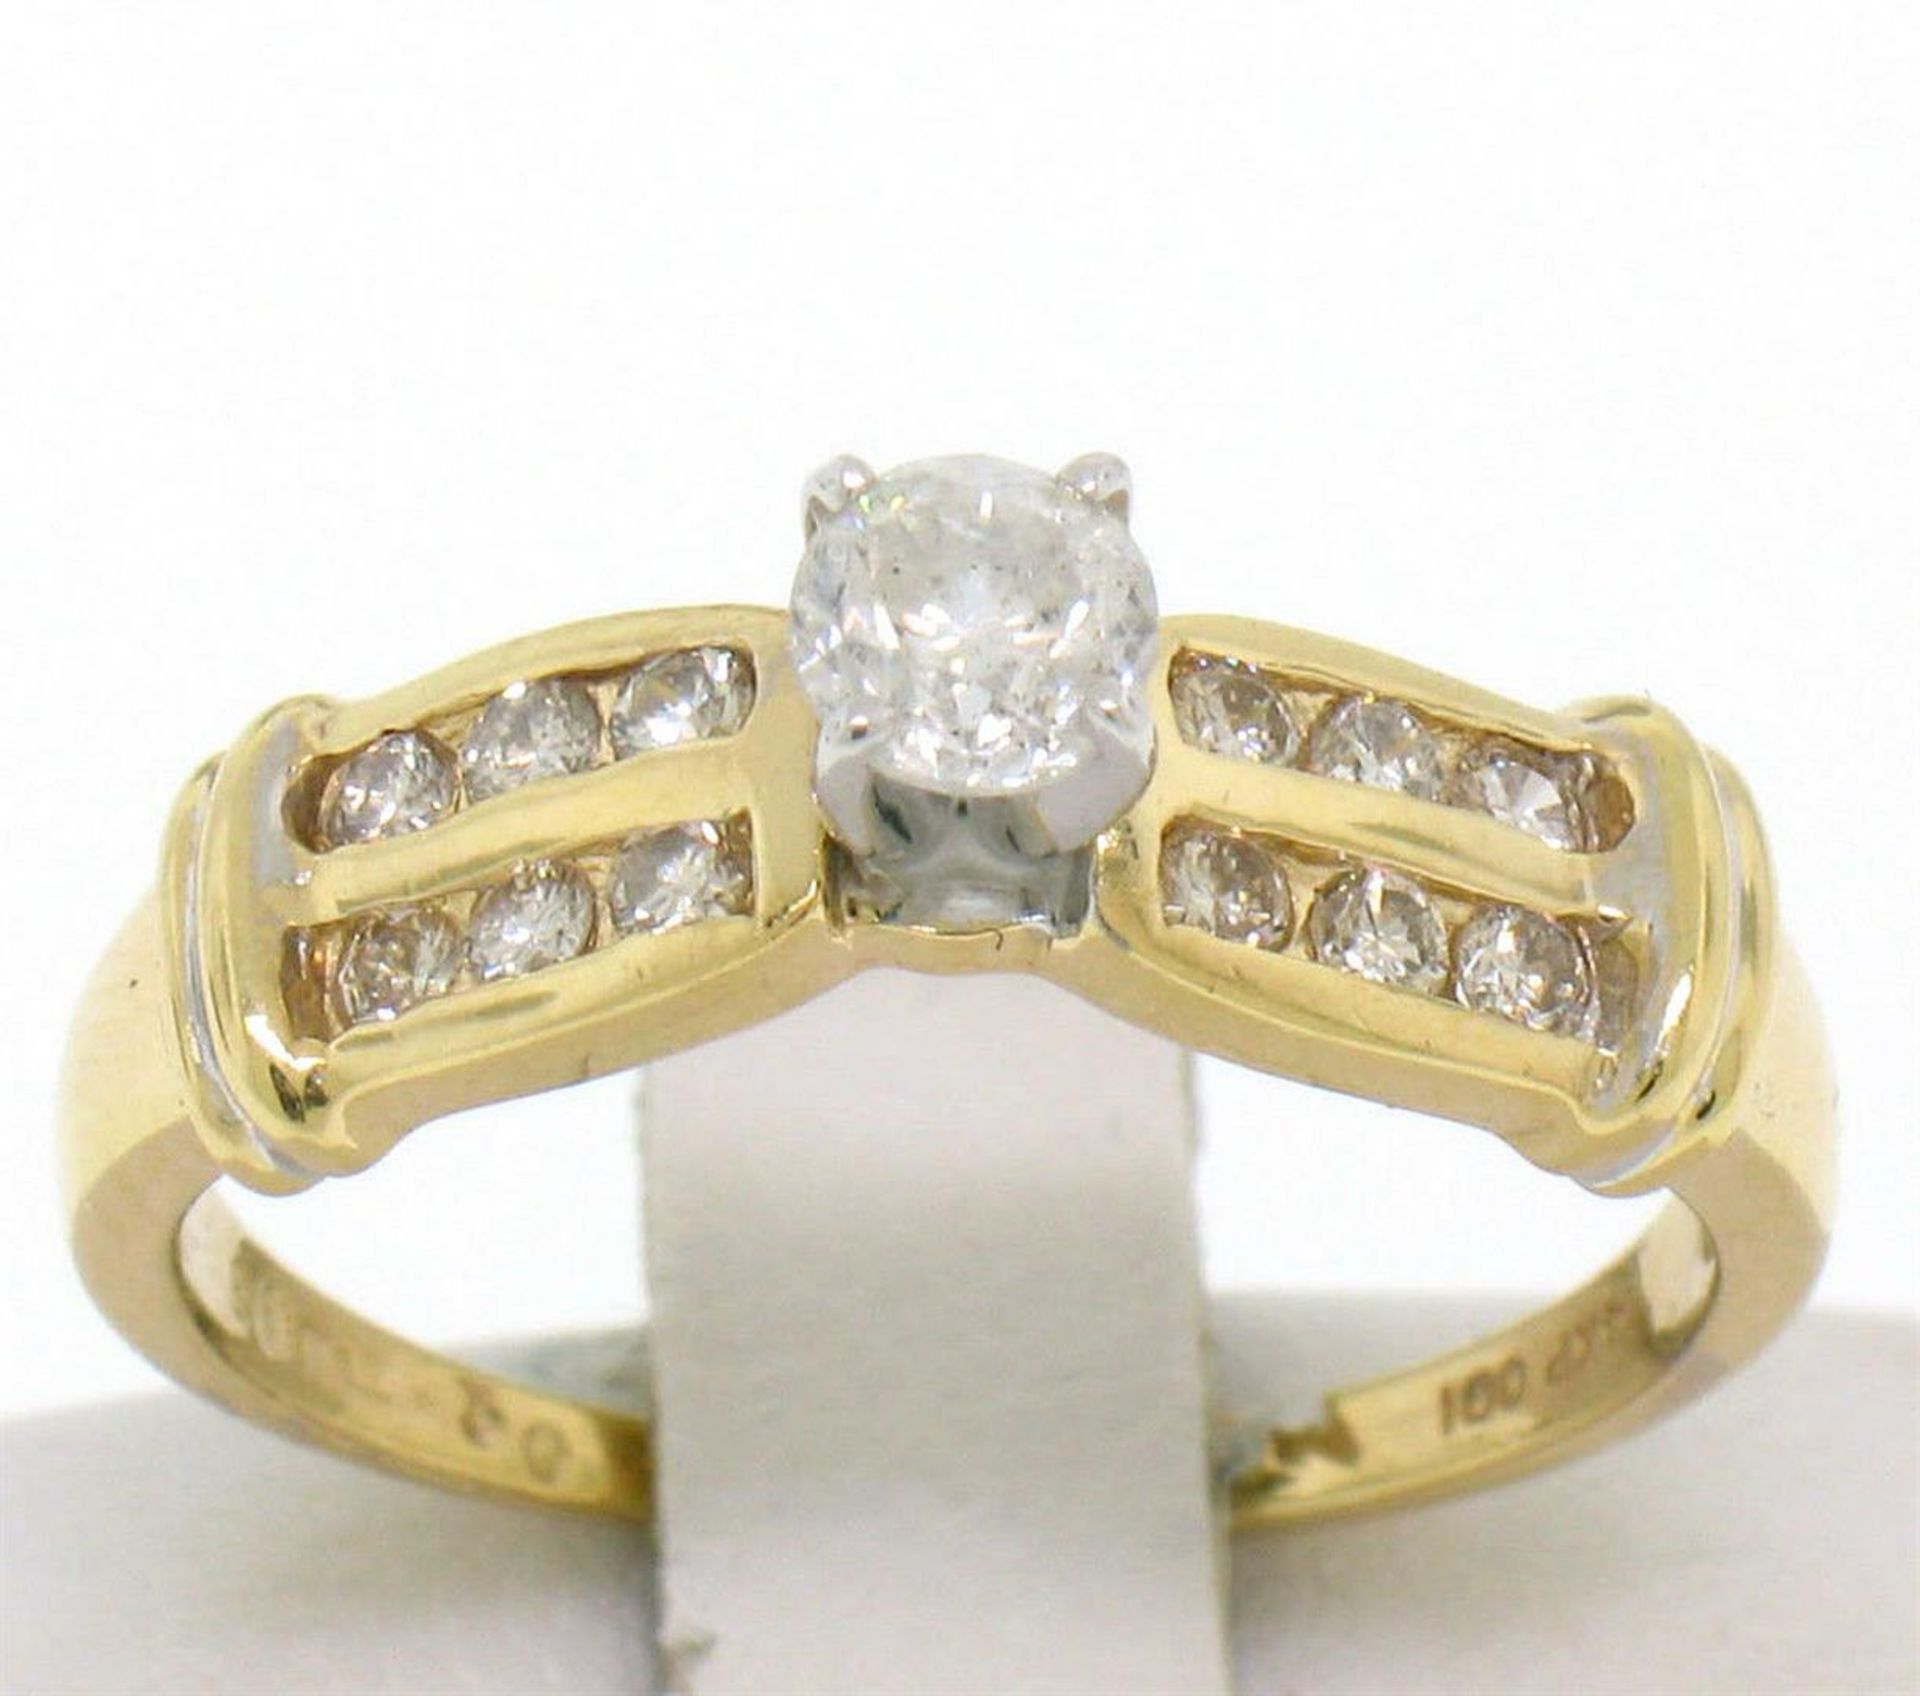 14k Yellow Gold 0.30ctw Round Diamond & Dual Row Channel Accent Engagement Ring - Image 2 of 6